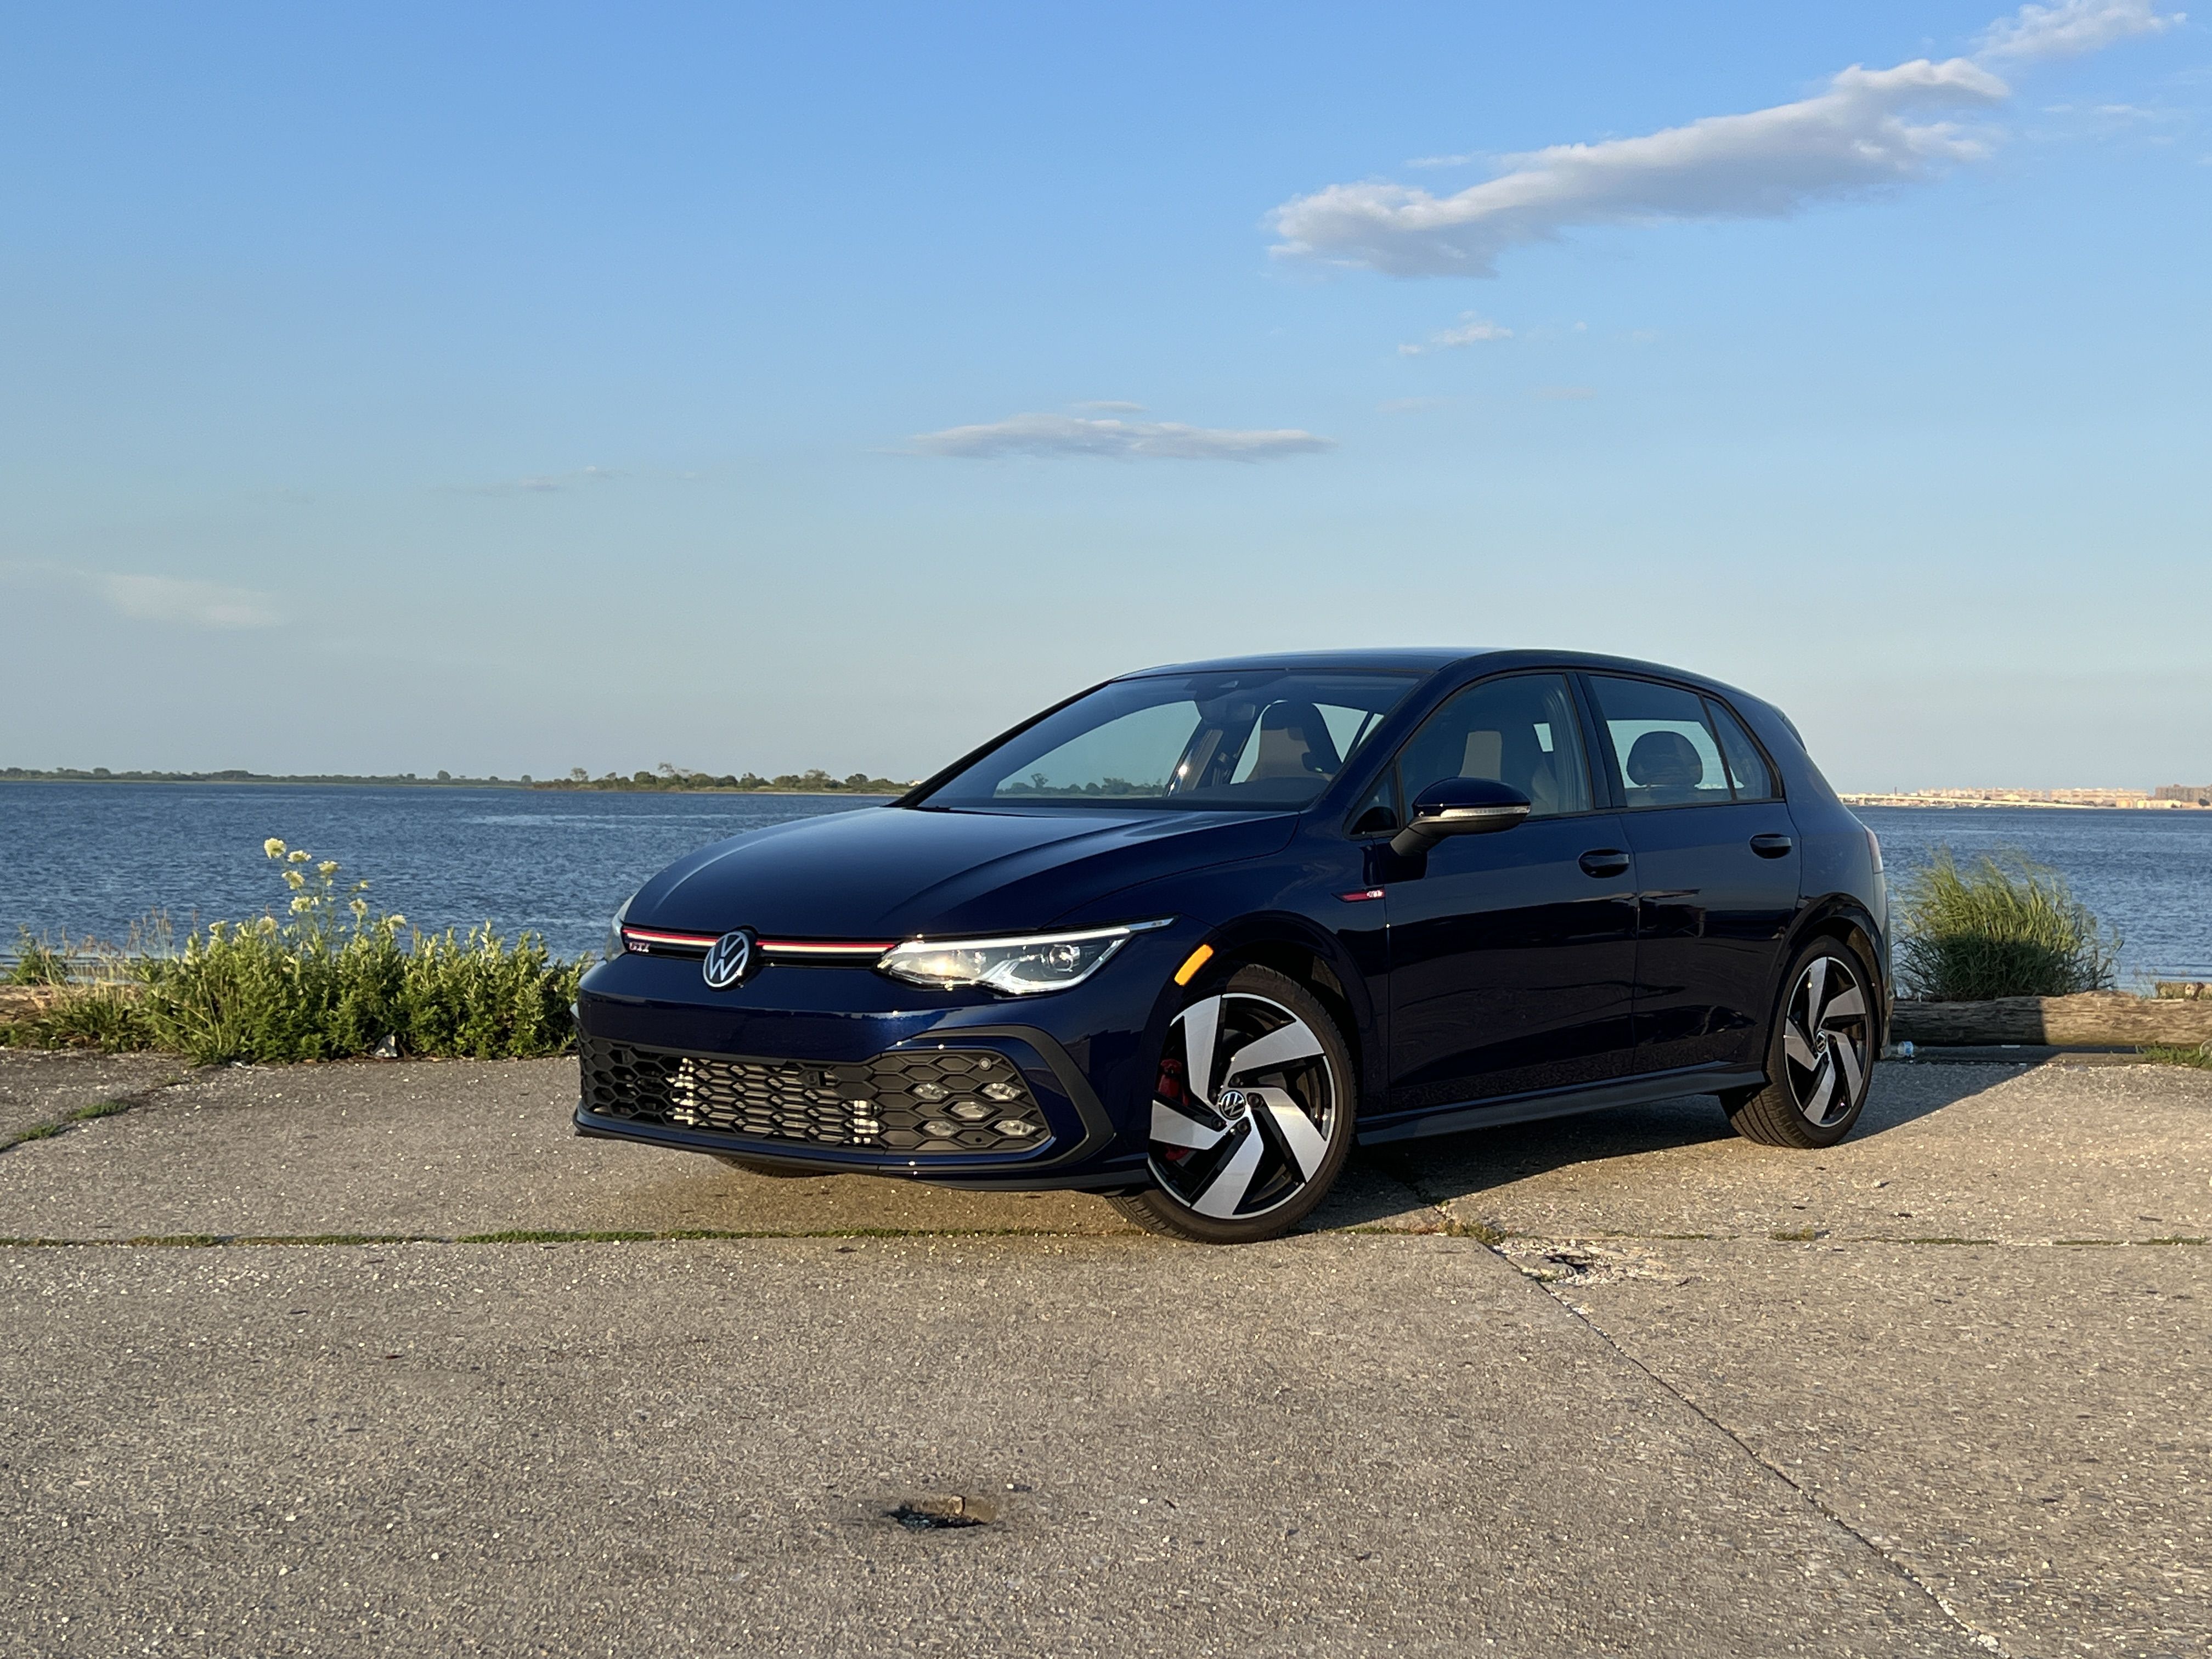 Limited Edition Golf 6 GTI Models Announced